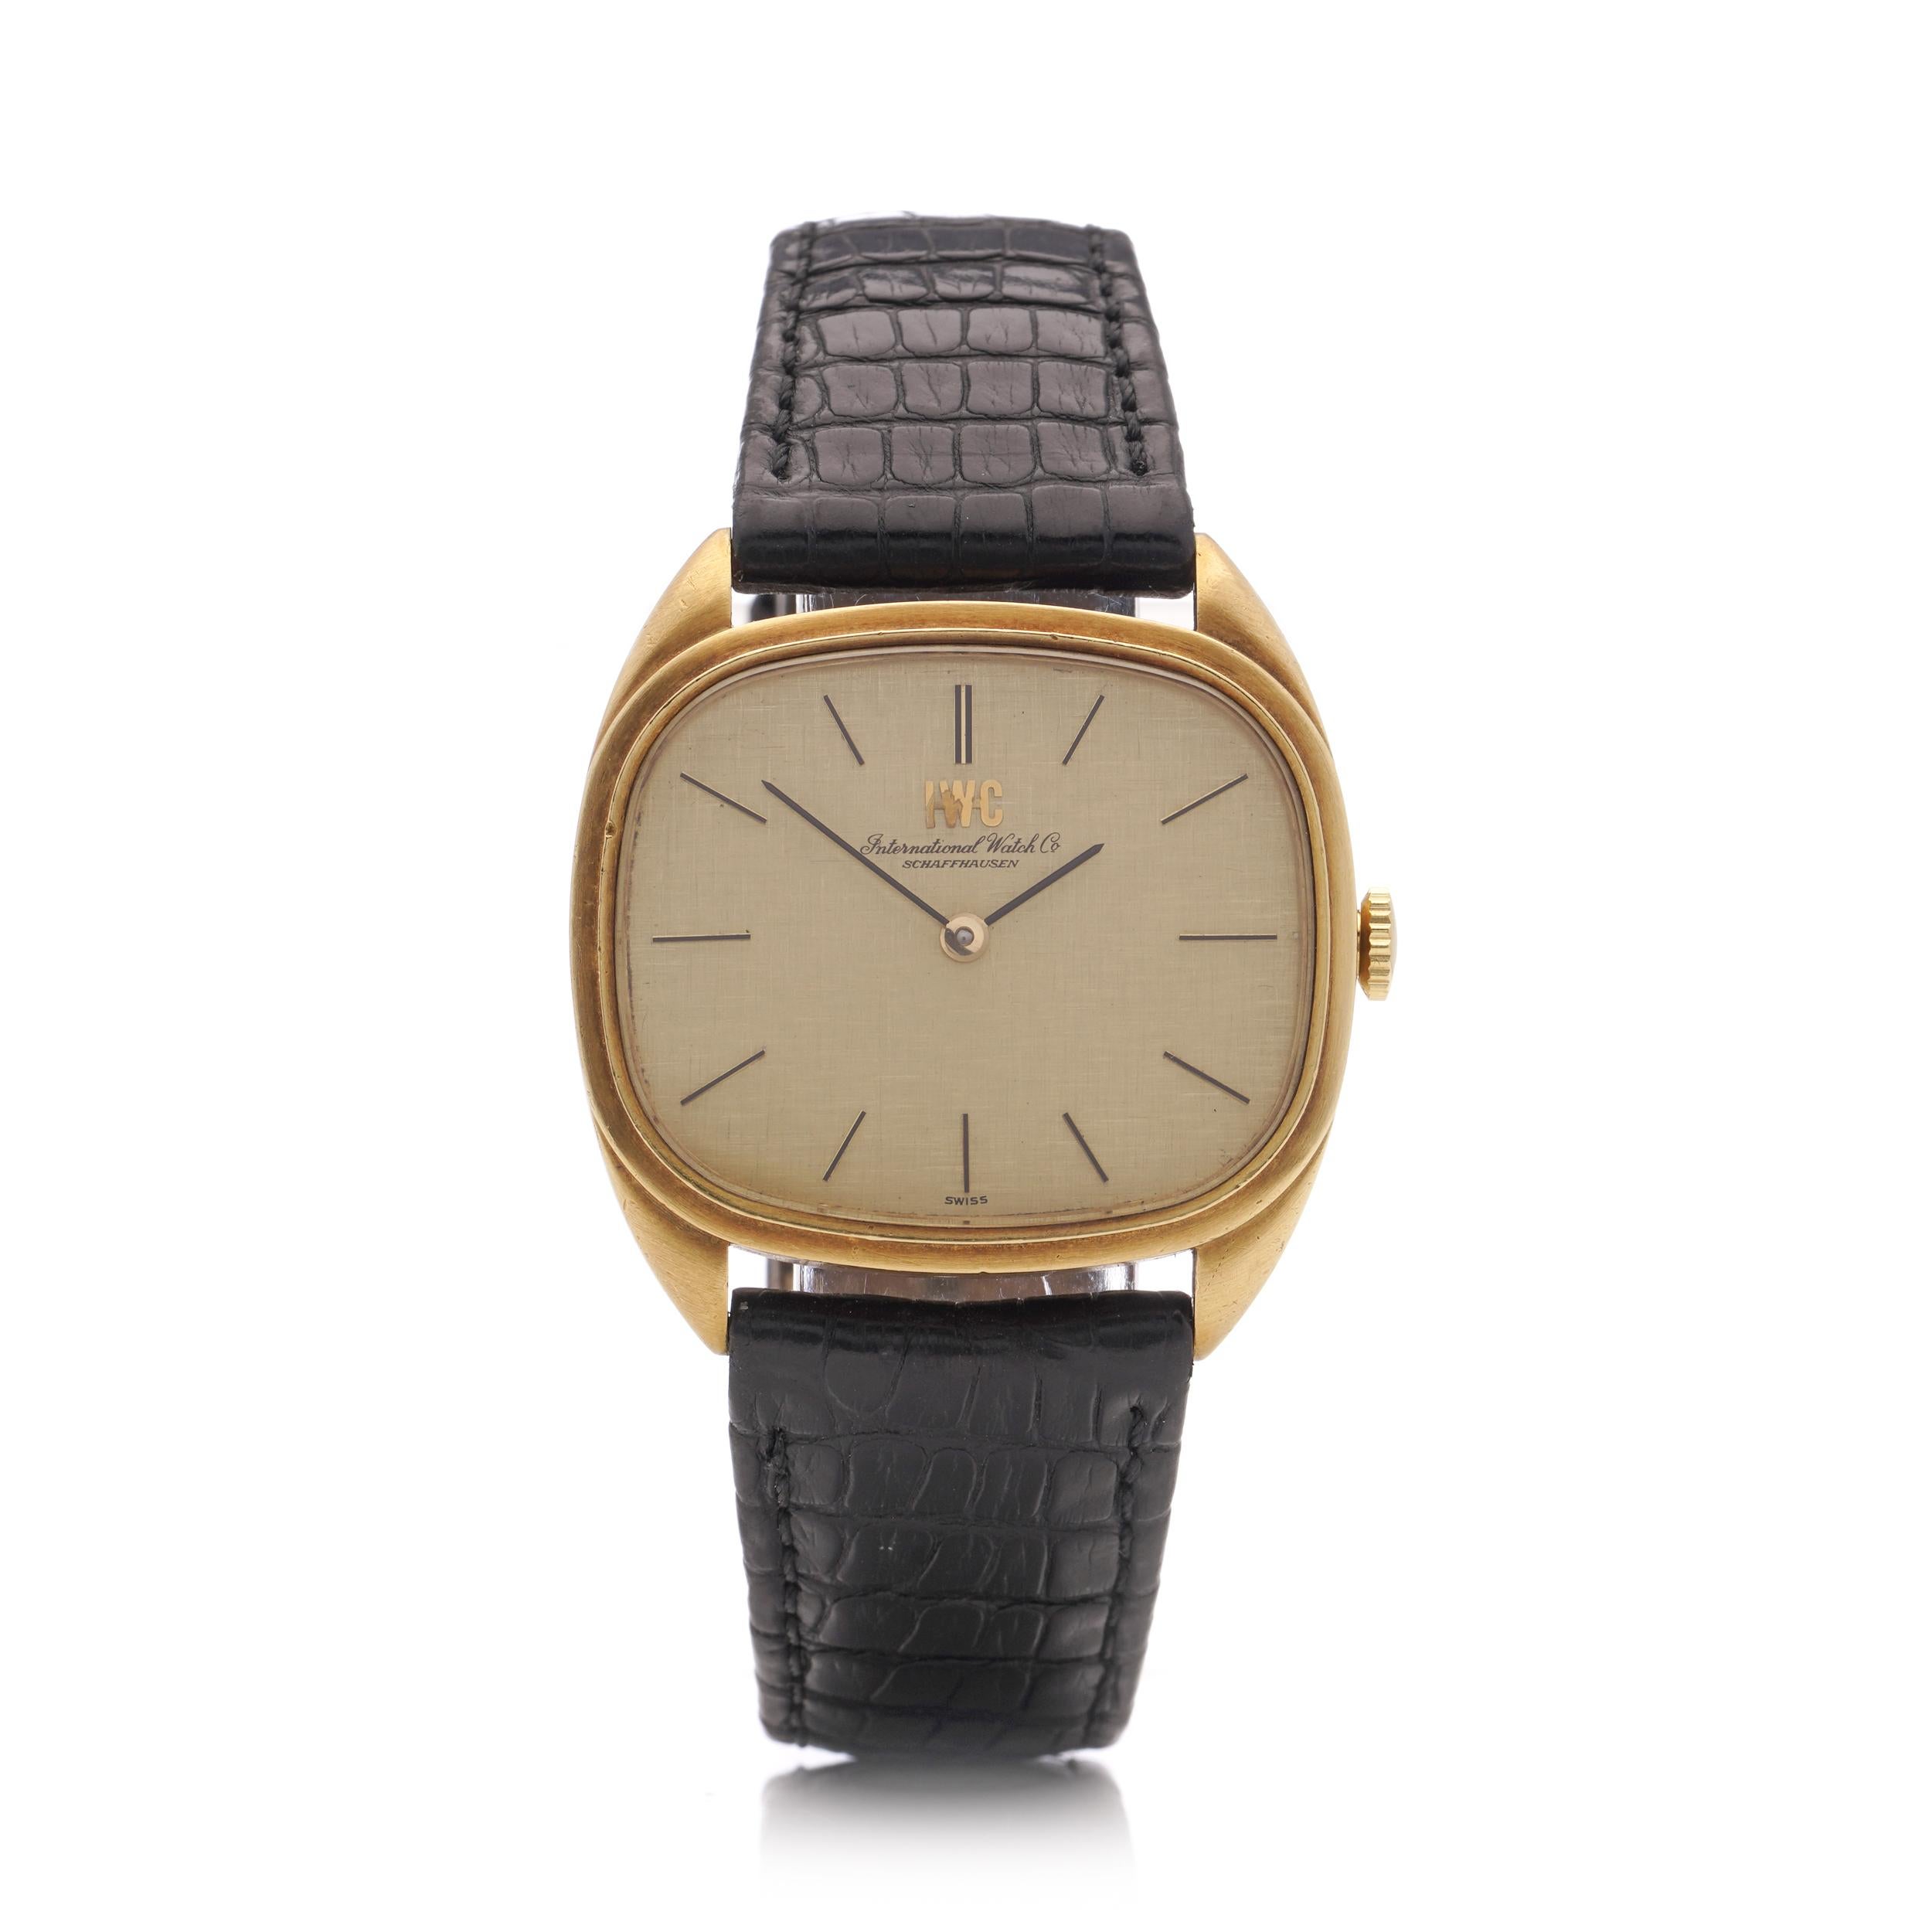 IWC 18k. yellow gold men's manual winding wristwatch.  
Brand: International Watch Company
Reference: 2754
Period: 1980 - 1990's  
Movement: Manual Winding Calibre: 423
Case material: 18 kt. Yellow gold 
Case form: rectangular
Dial colour : Gold